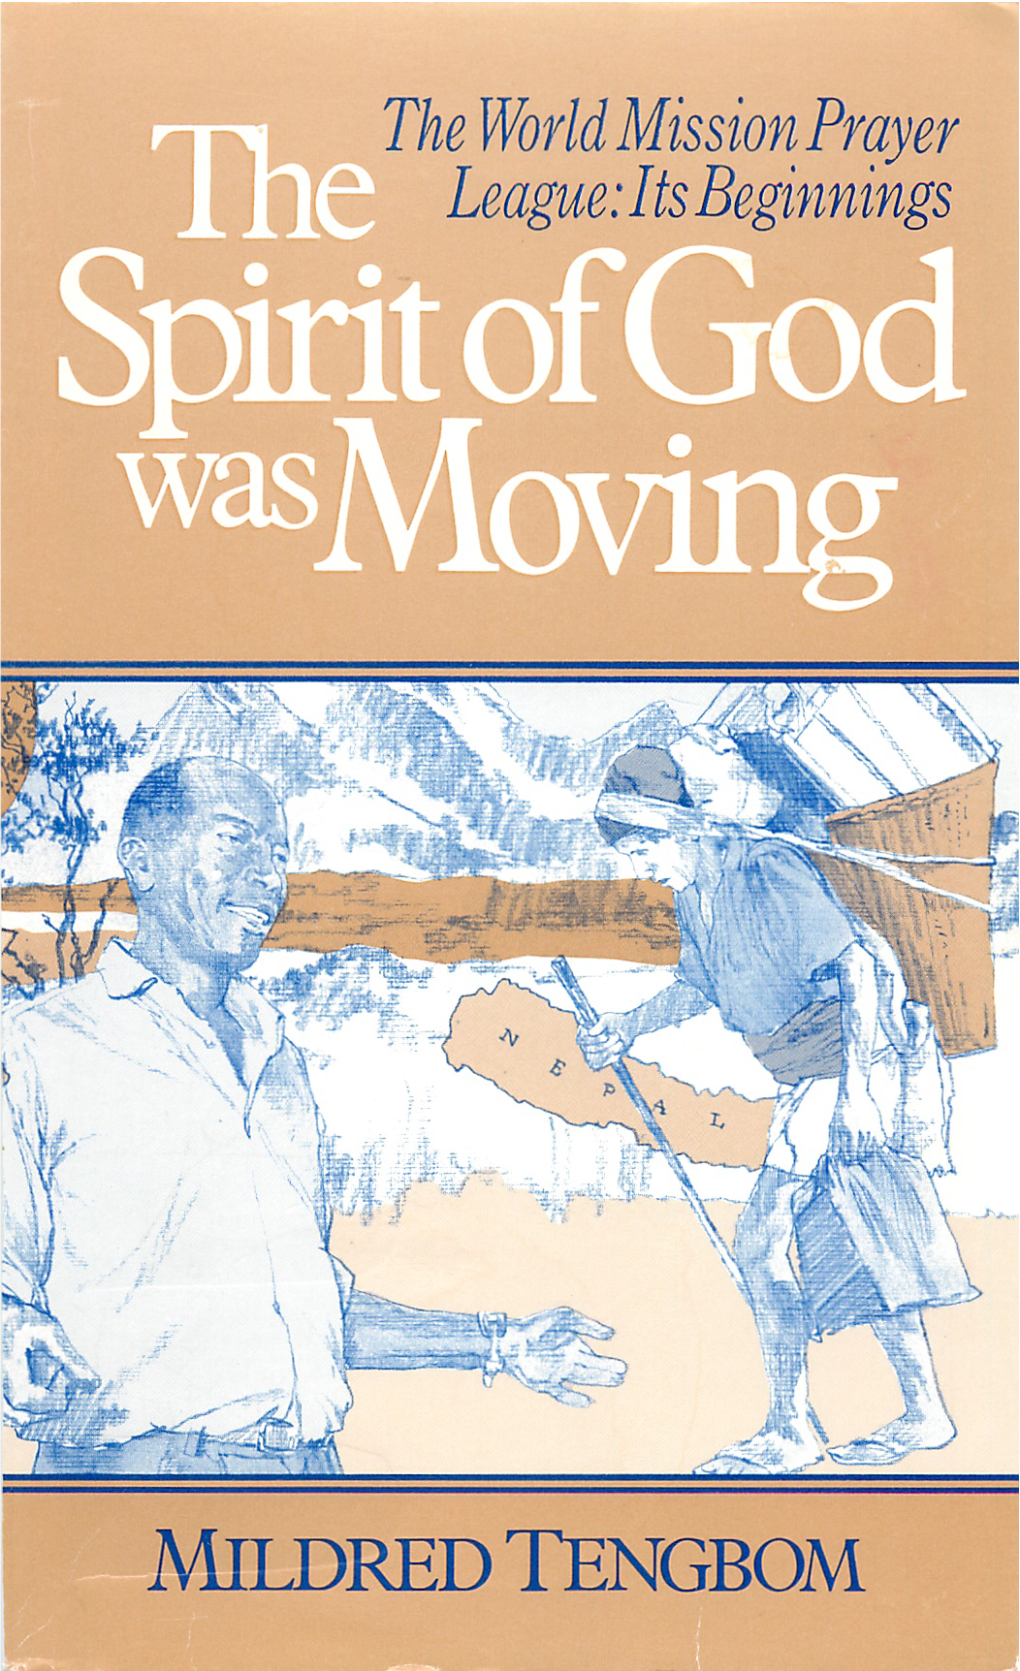 THE SPIRIT of GOD WAS MOVING Copyright © 1985 World Mission Prayer League